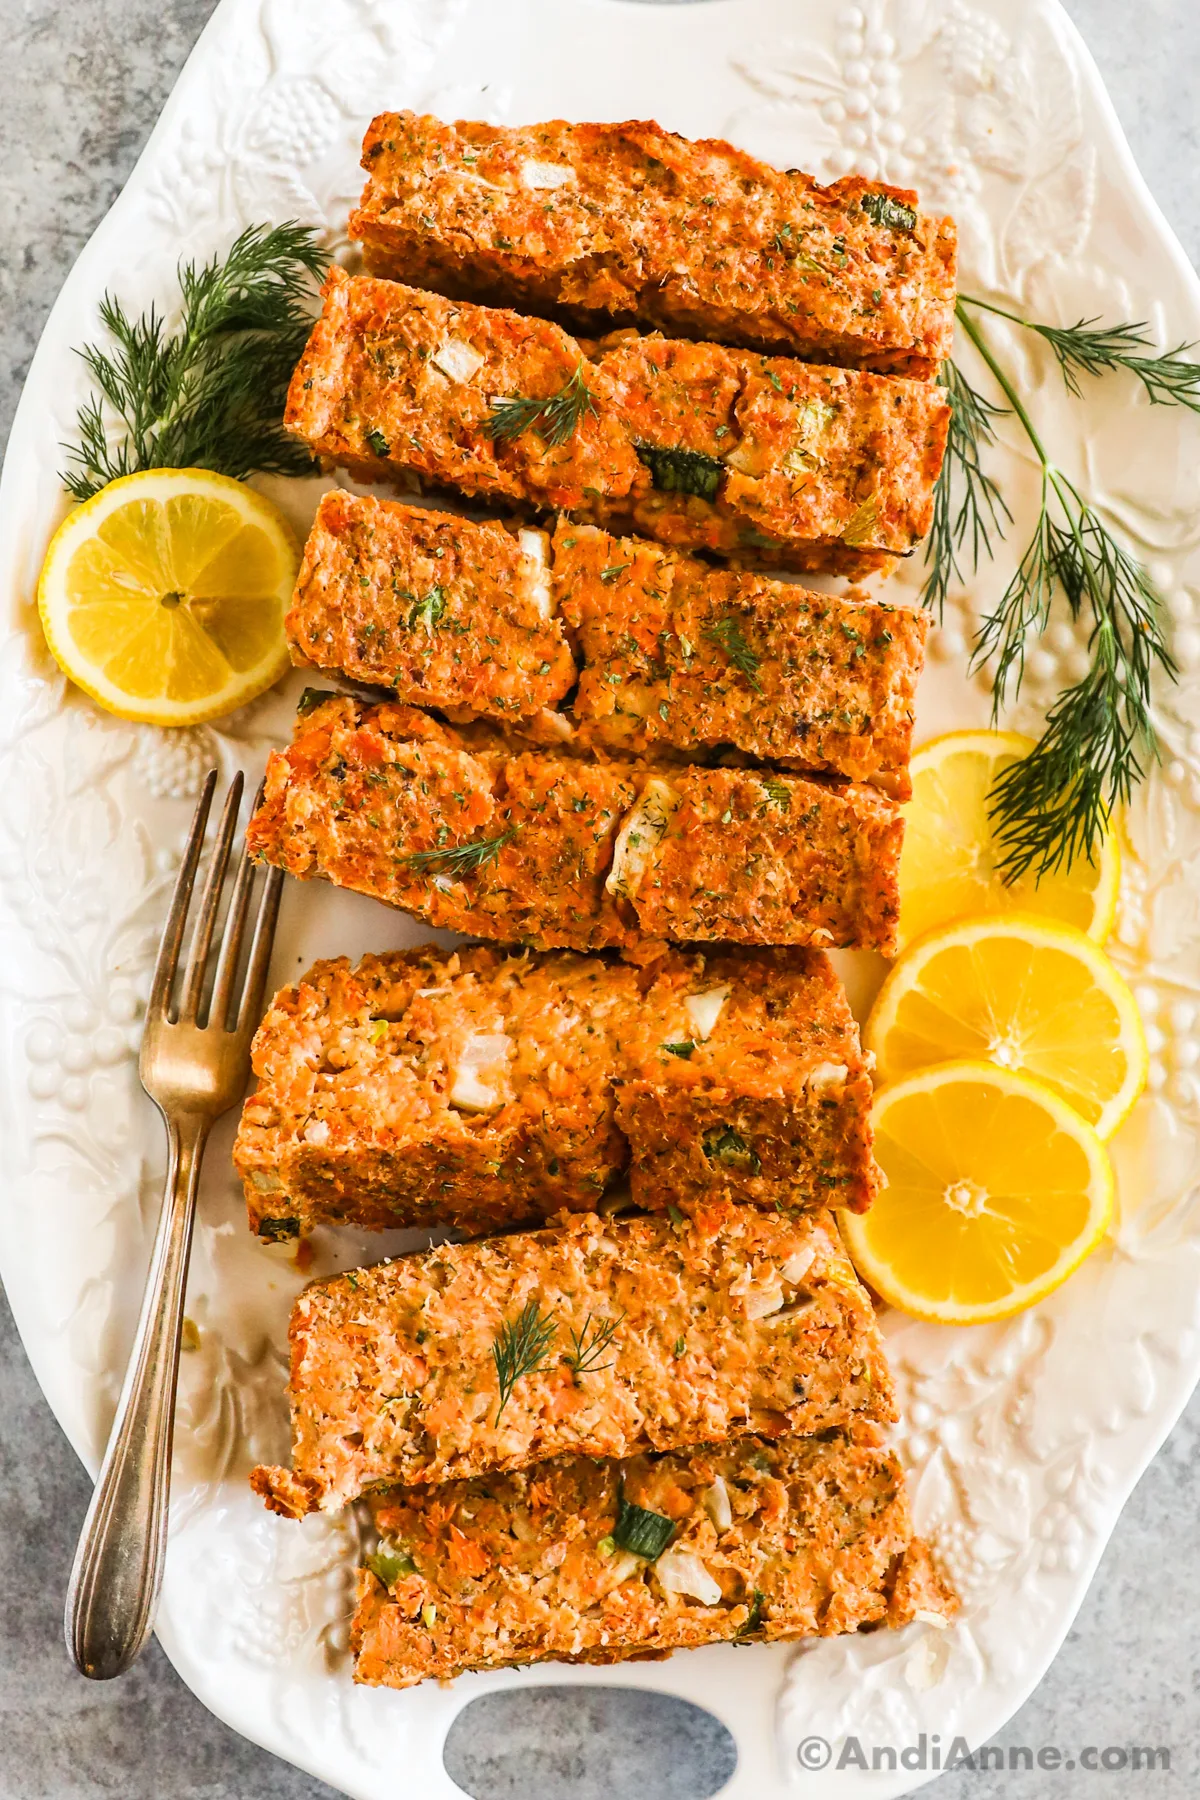 Slices of salmon loaf on a white plate with fresh dill, a fork and lemon slices.